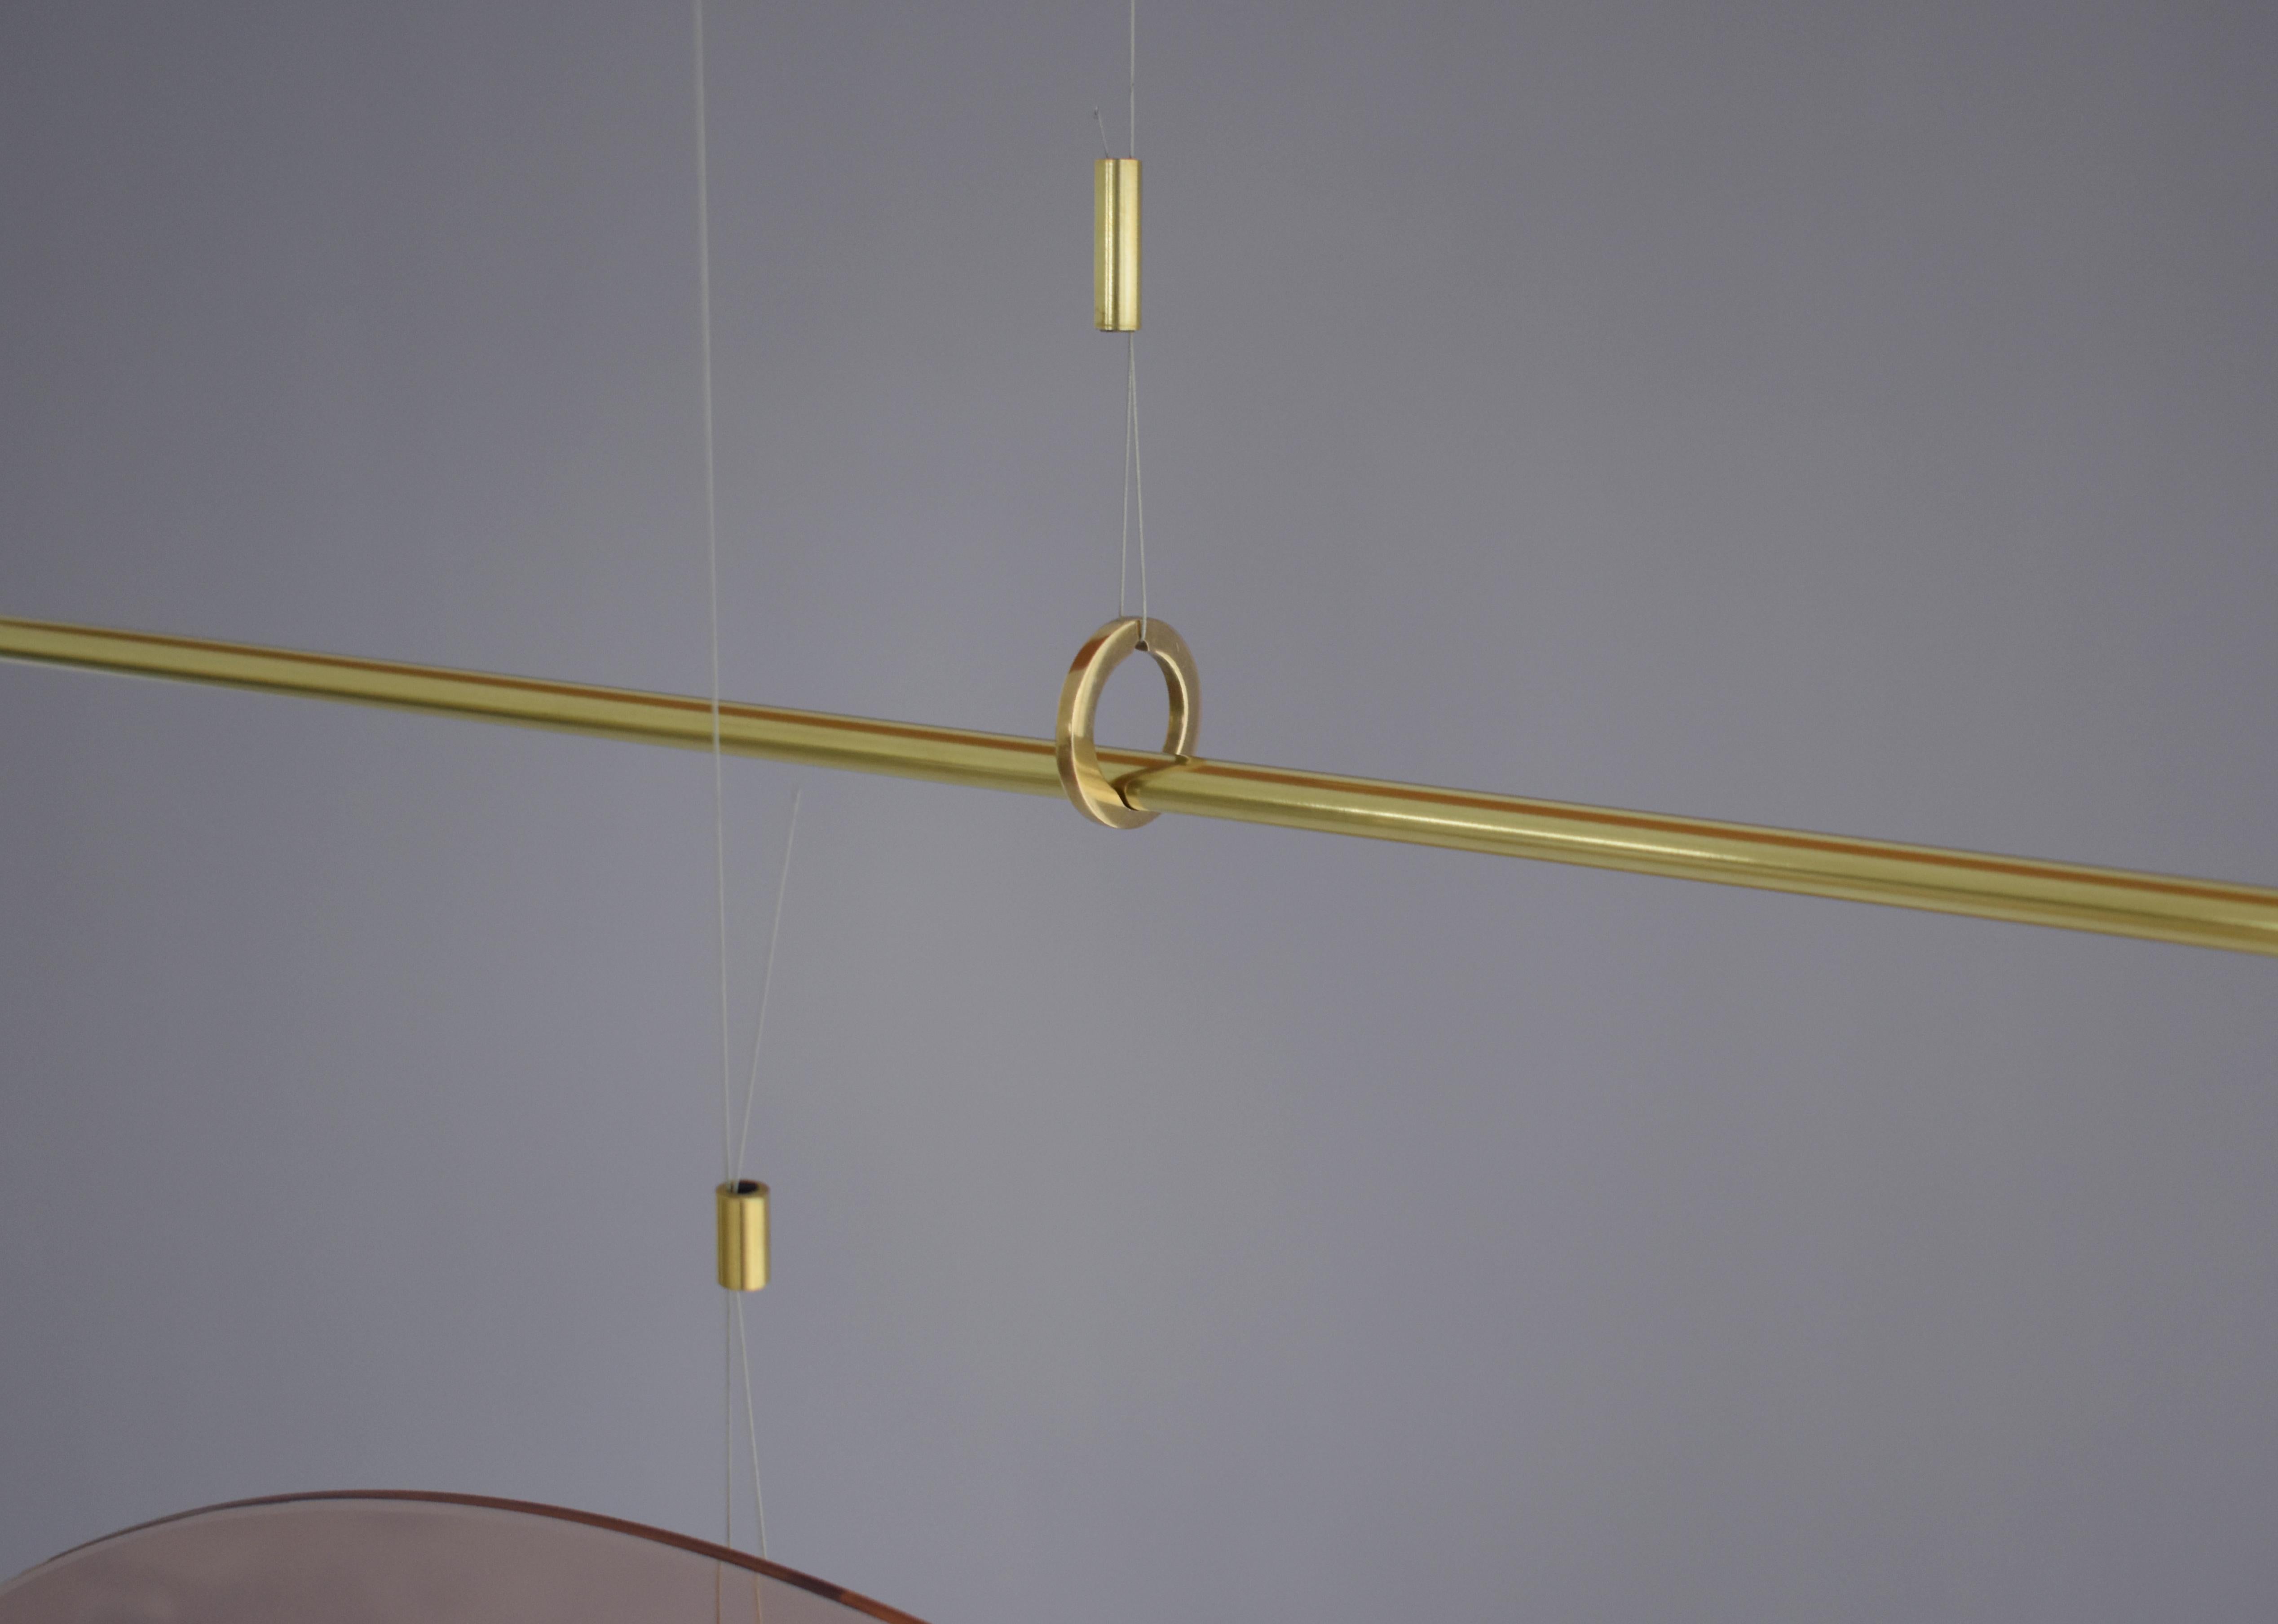 Sculptural brass light pendant - Equilibrum by Periclis Frementitis

Bulb specifications
120 - 240V
G4 LED / 5W / 12V / 400lm / 3000K
Product specifications
Input voltage: 120V - 240V
Maximum wattage: 15W
Maximum Lm: 1200 lm
Product weight: